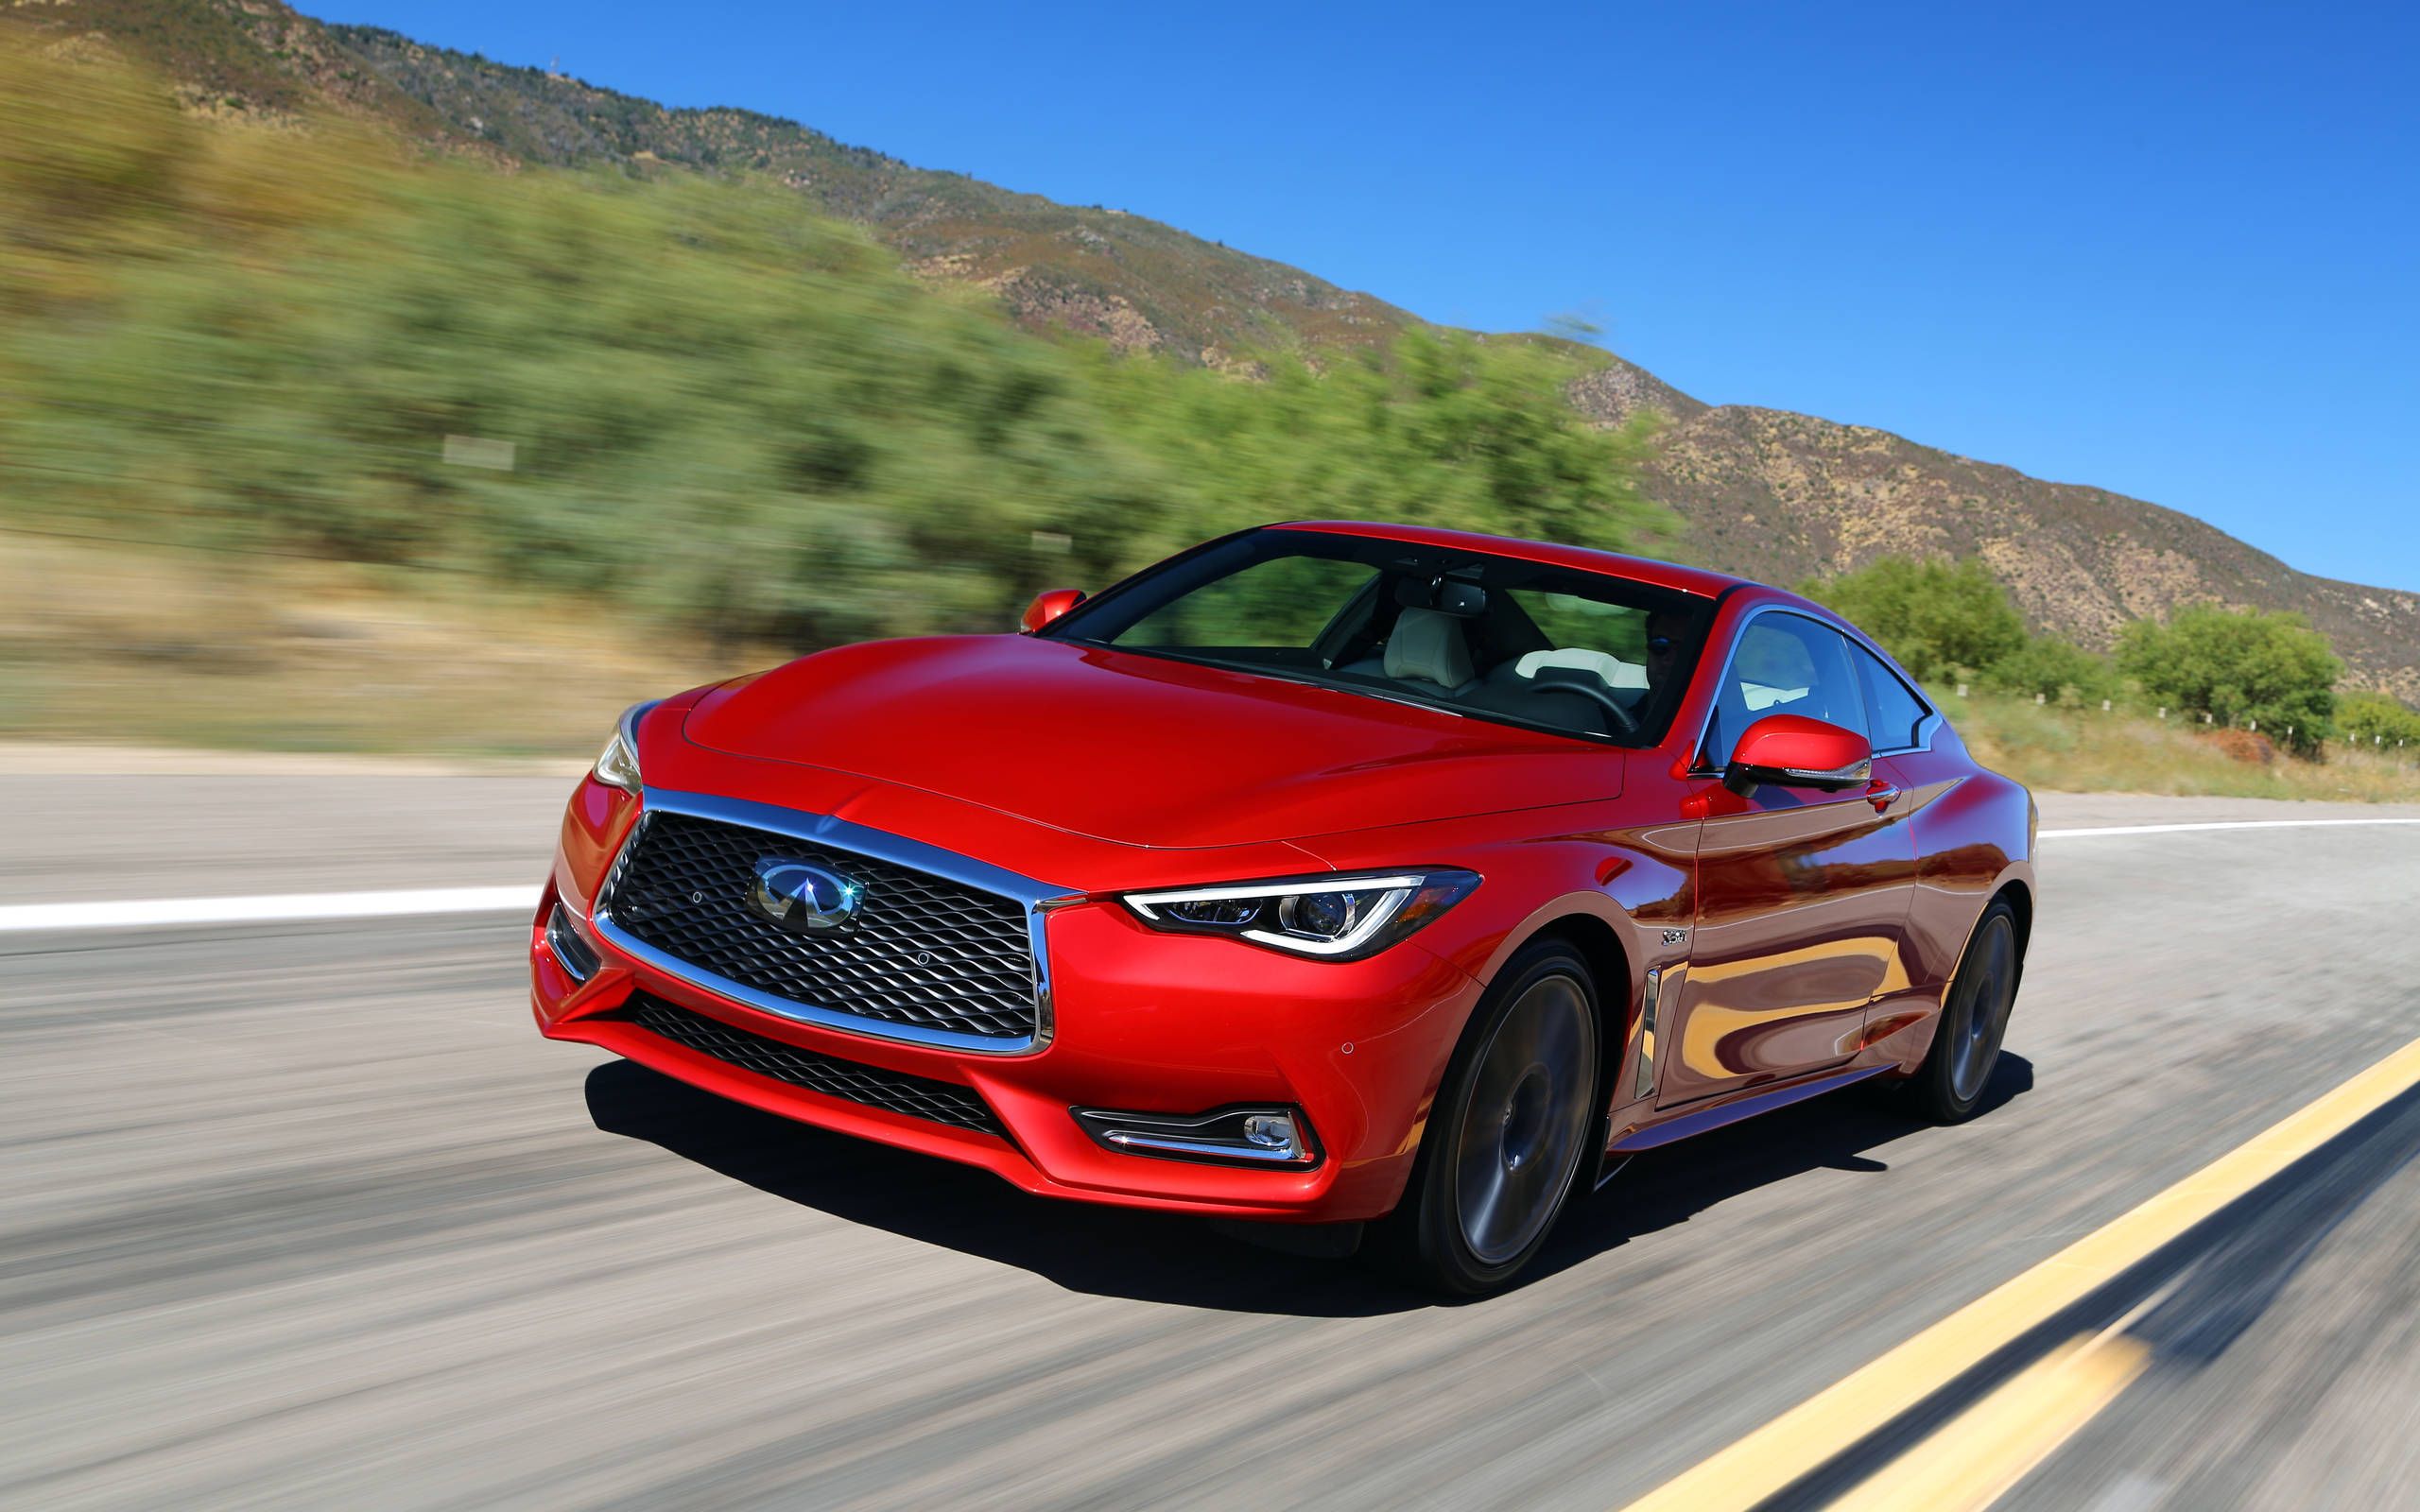 2017 Infiniti Q60 Red Sport 400 first drive: a case for the coupe